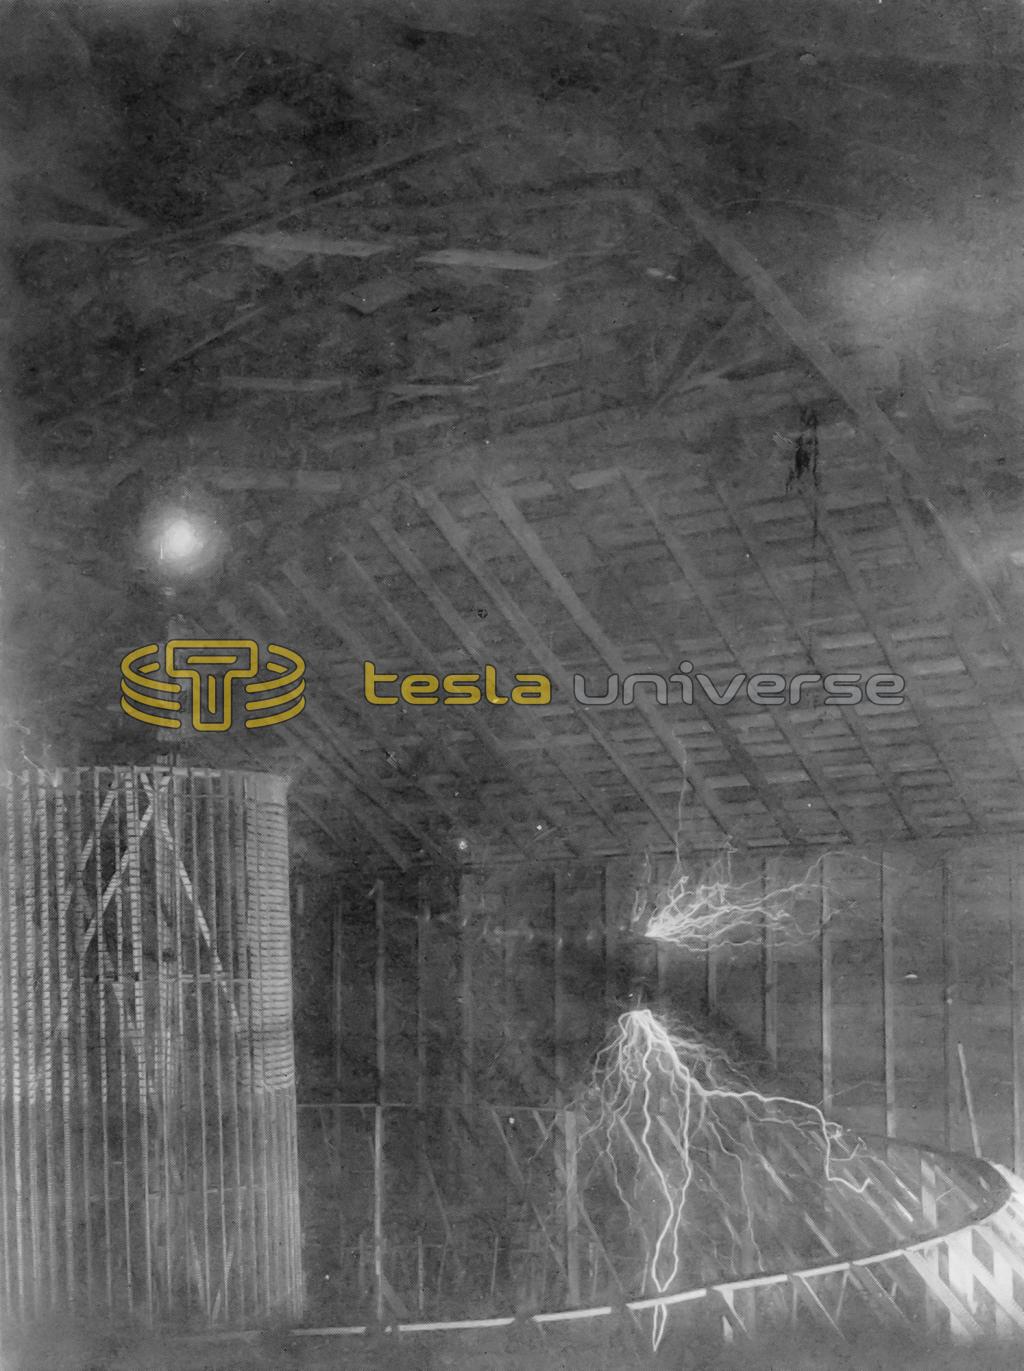 Tesla's Colorado Springs oscillator at low power and ceiling detail of lab